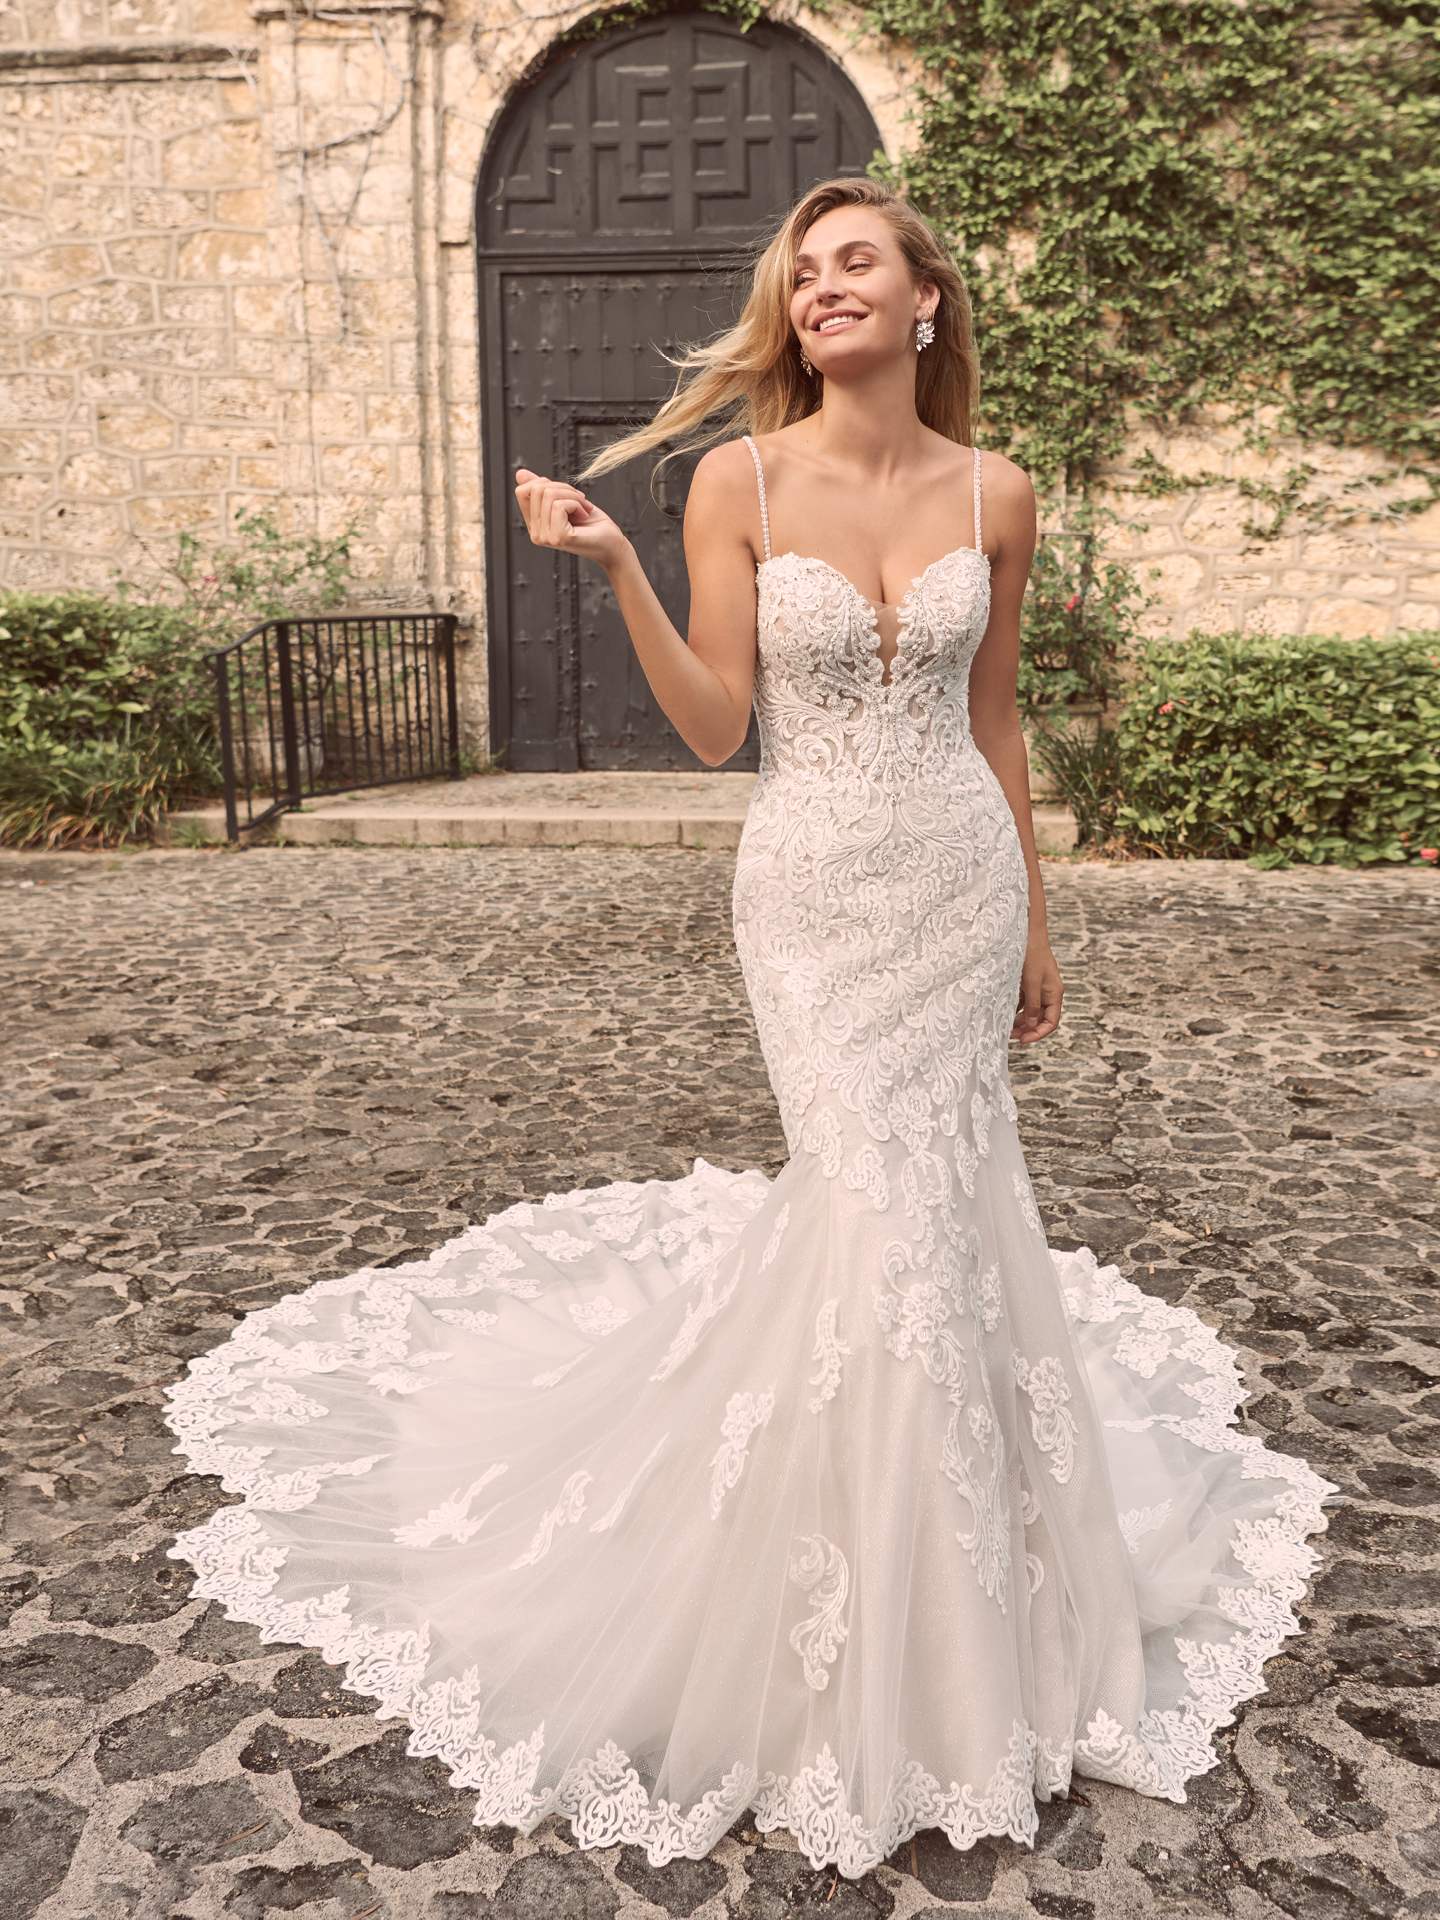 Strapless Beaded Lace Fit And Flare Wedding Dress With Sweetheart